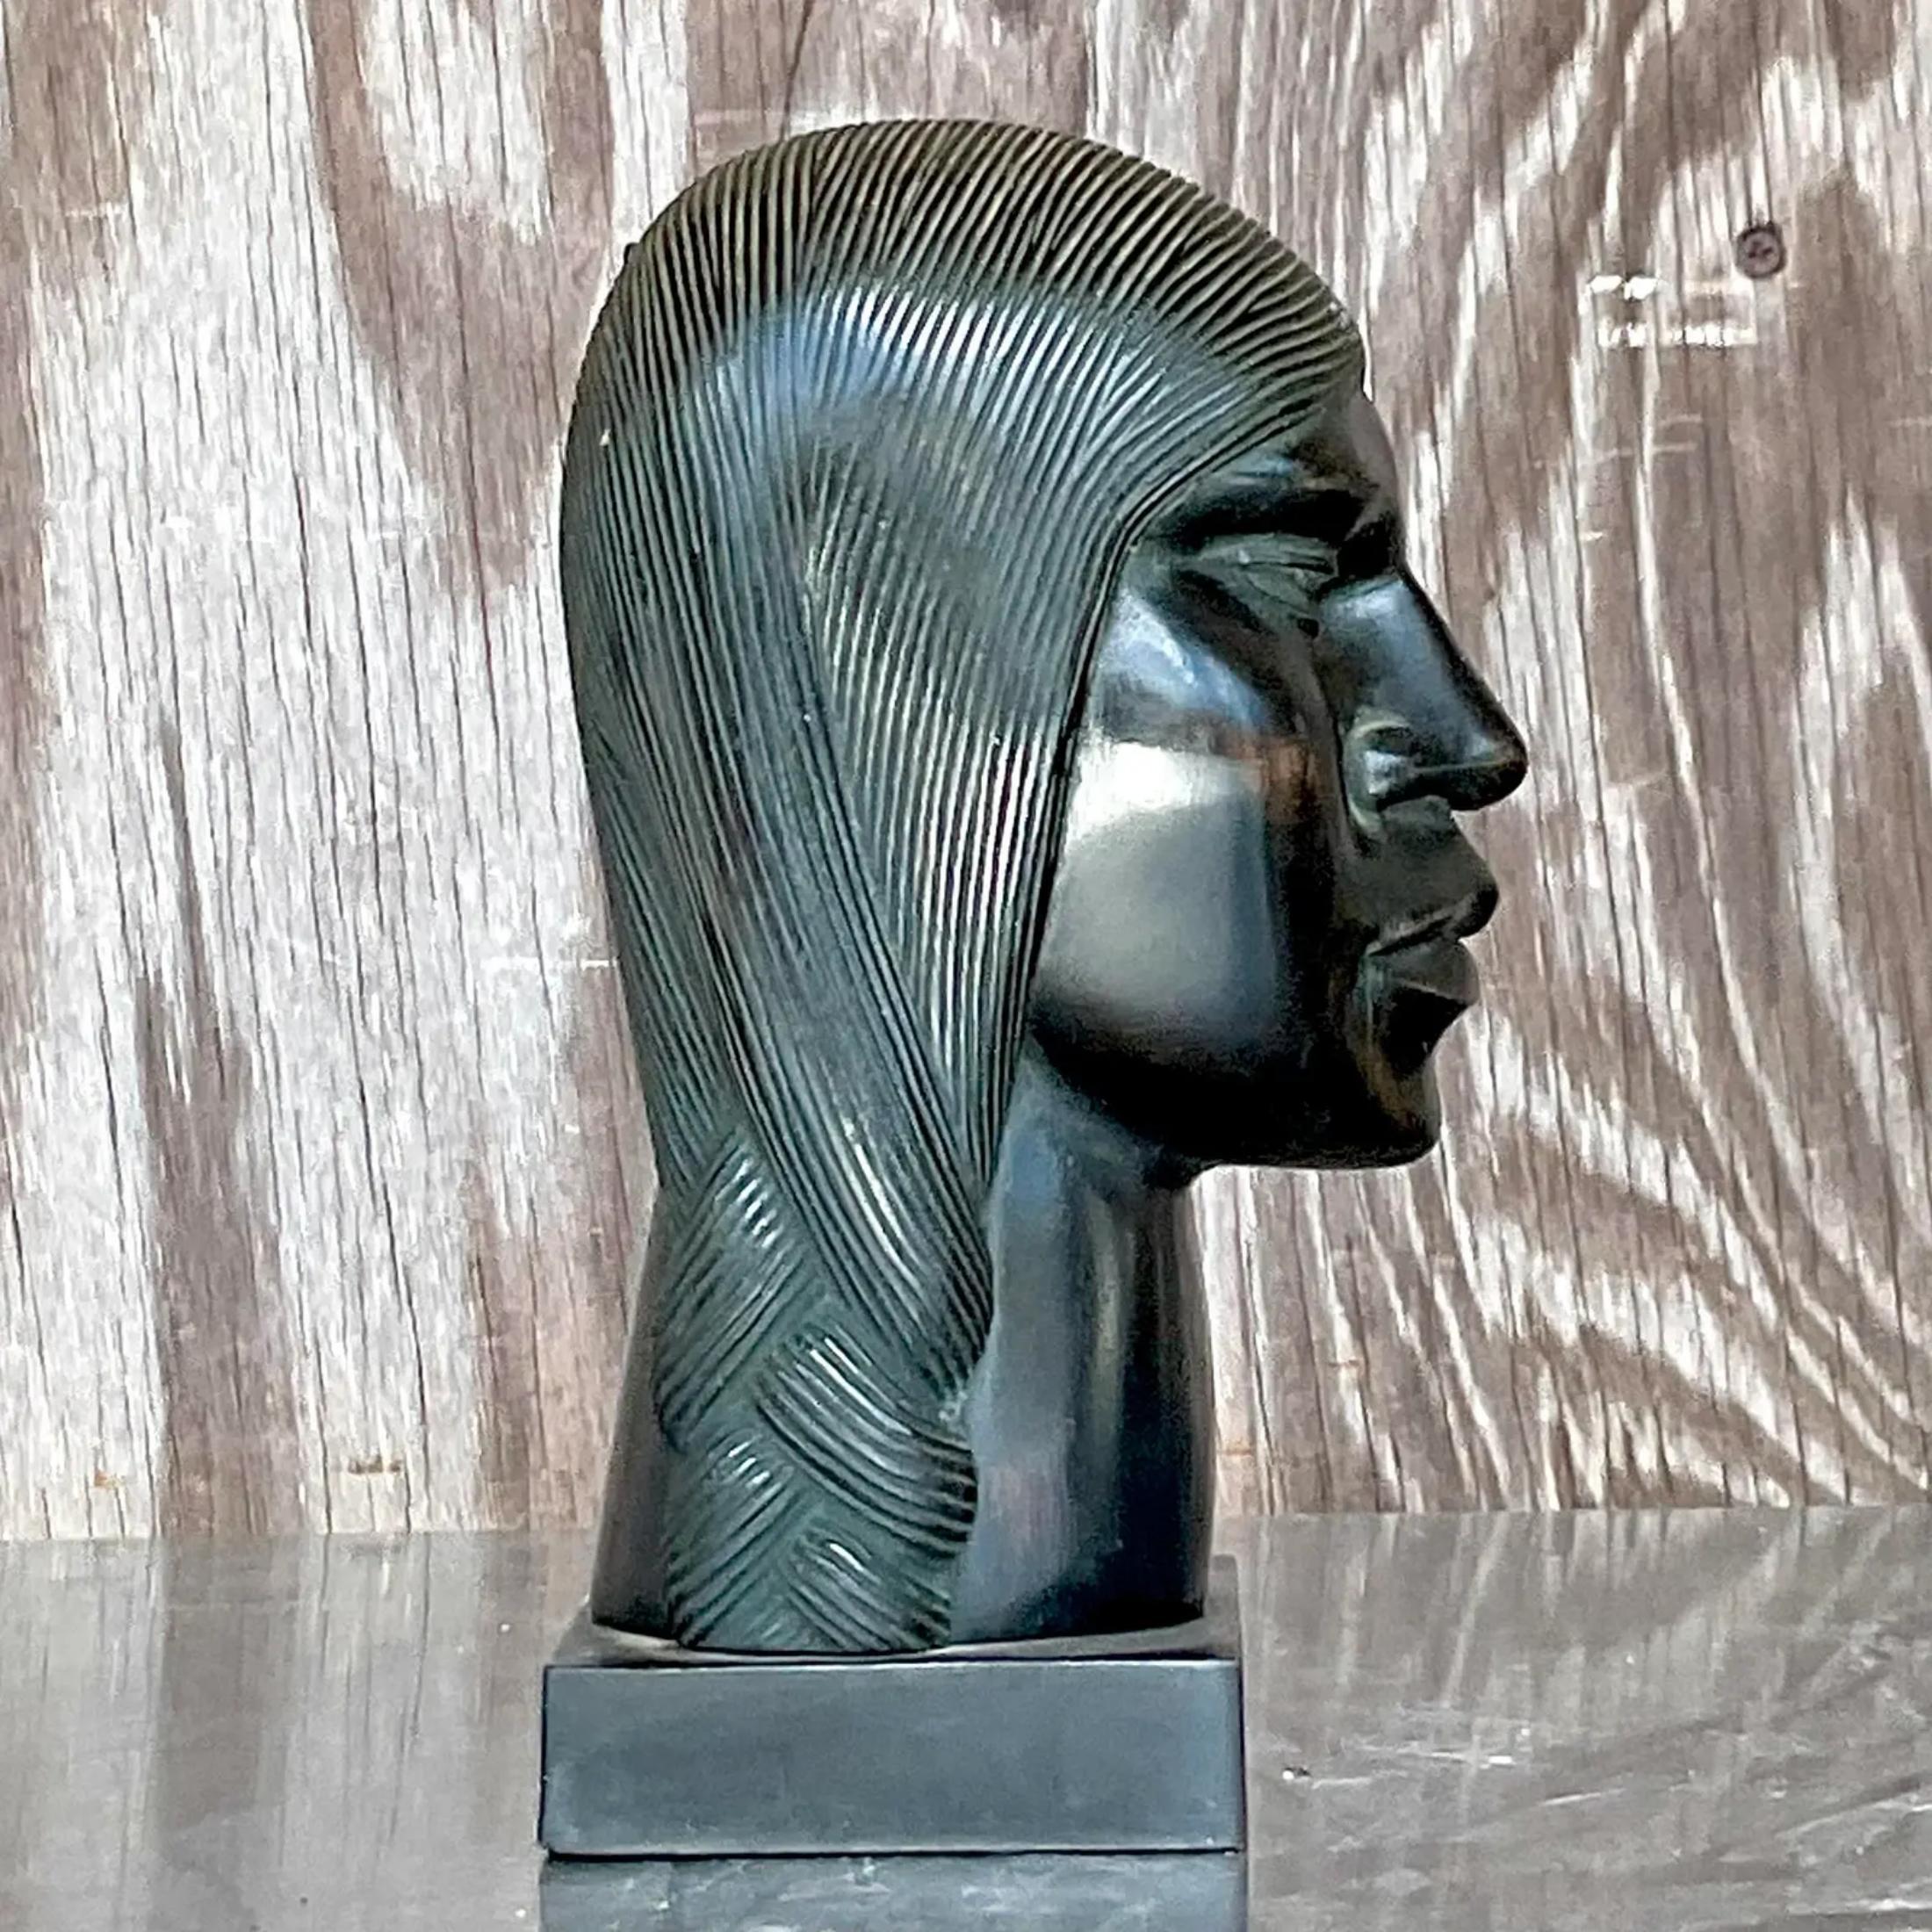 A fabulous vintage Boho carved ebony wood sculpture. A chic bust of man with stylized braids. Acquired from a Palm Beach estate.